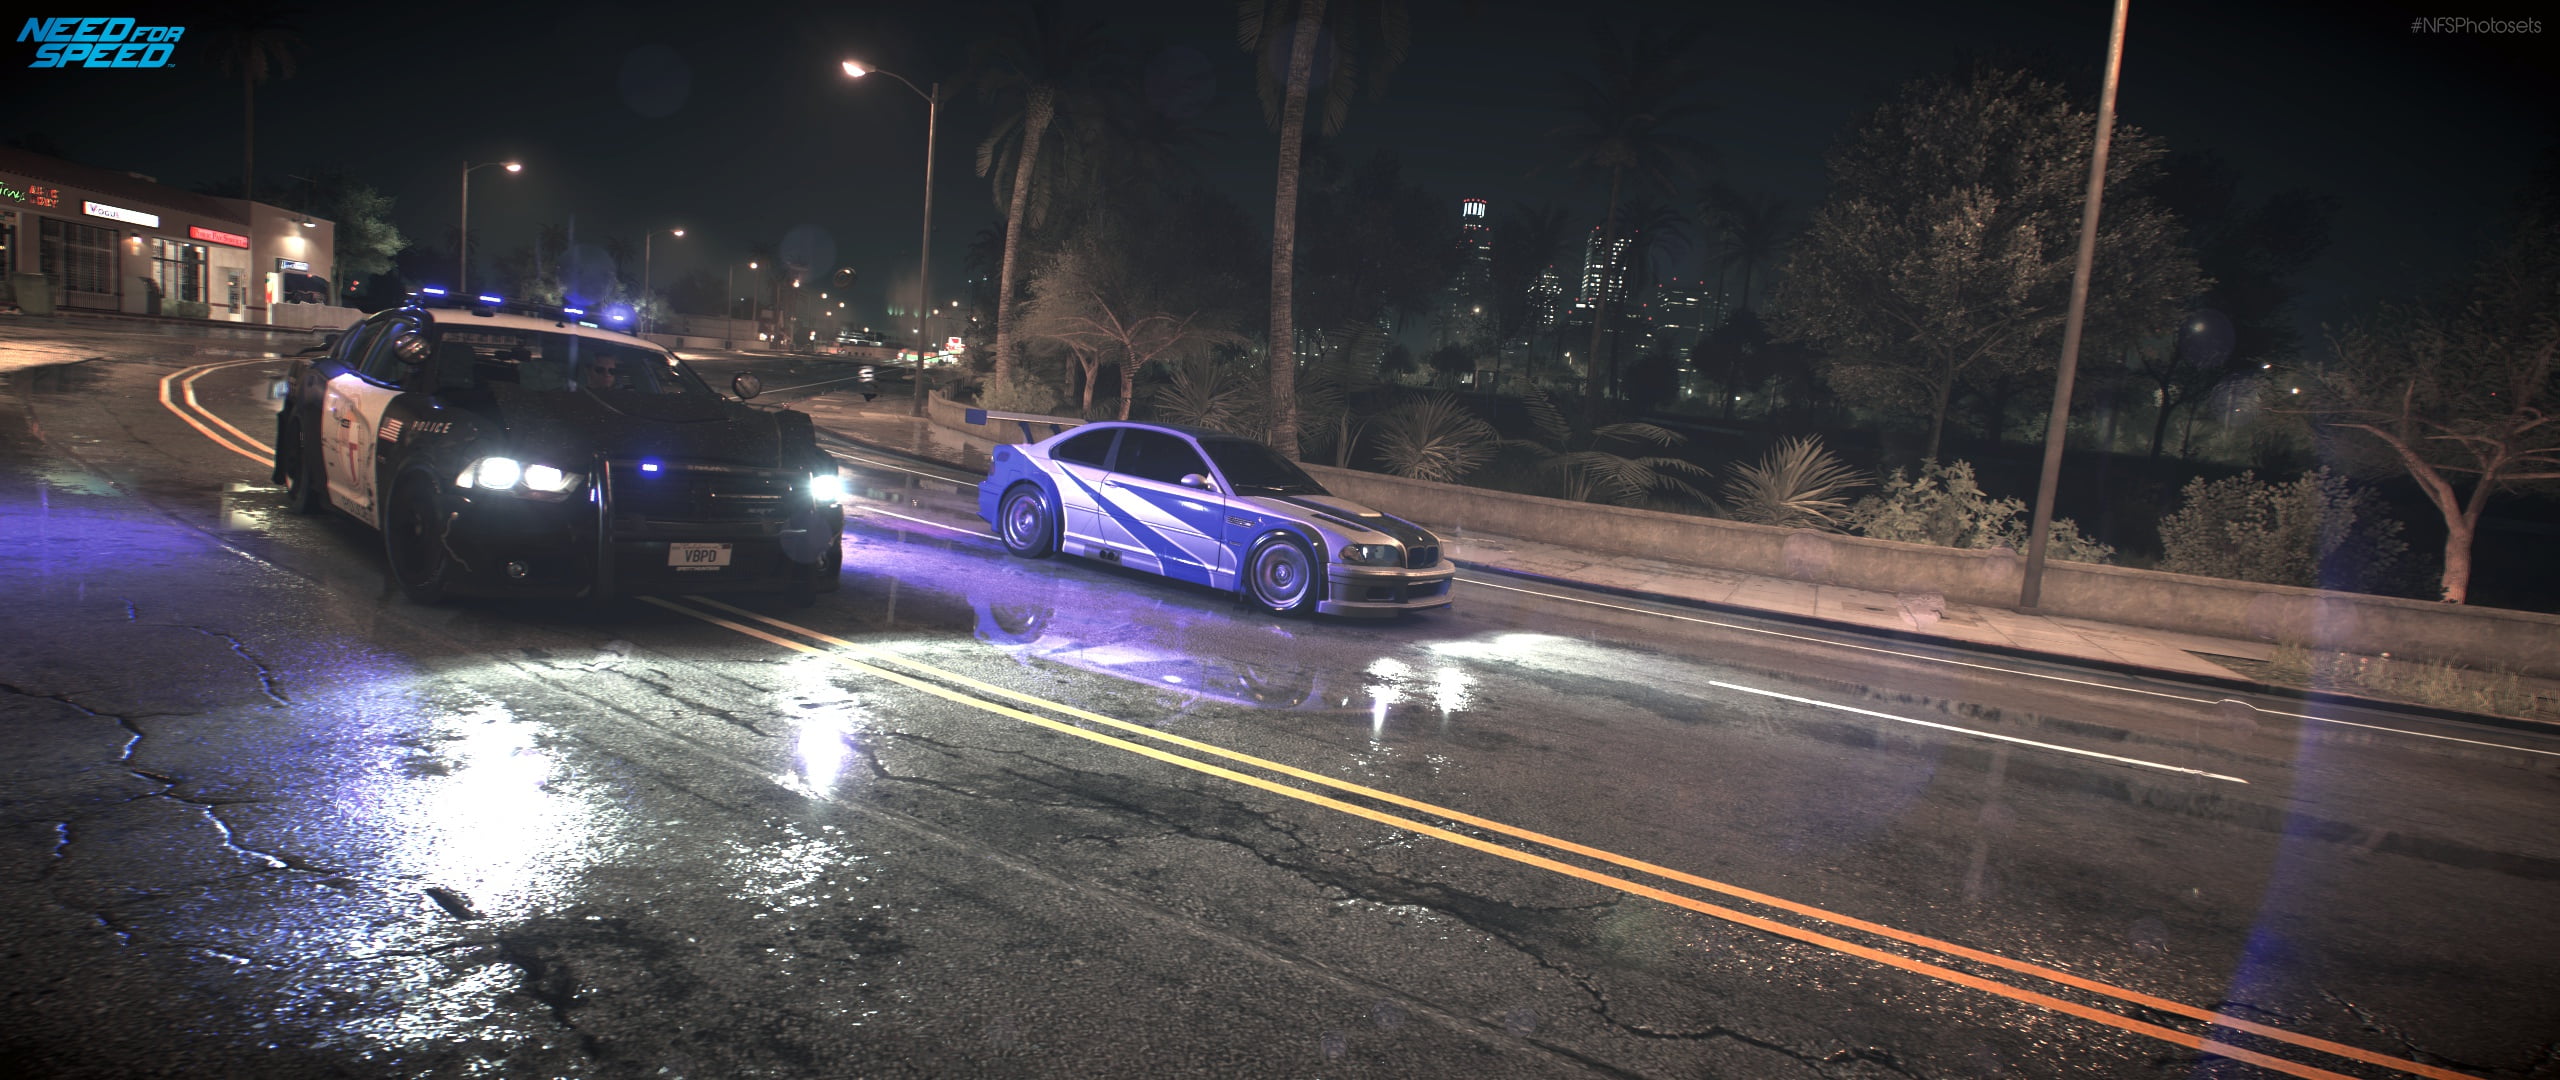 chase, BMW, Dodge, NFS, Police, Night, Most wanted, NFSPhotosets